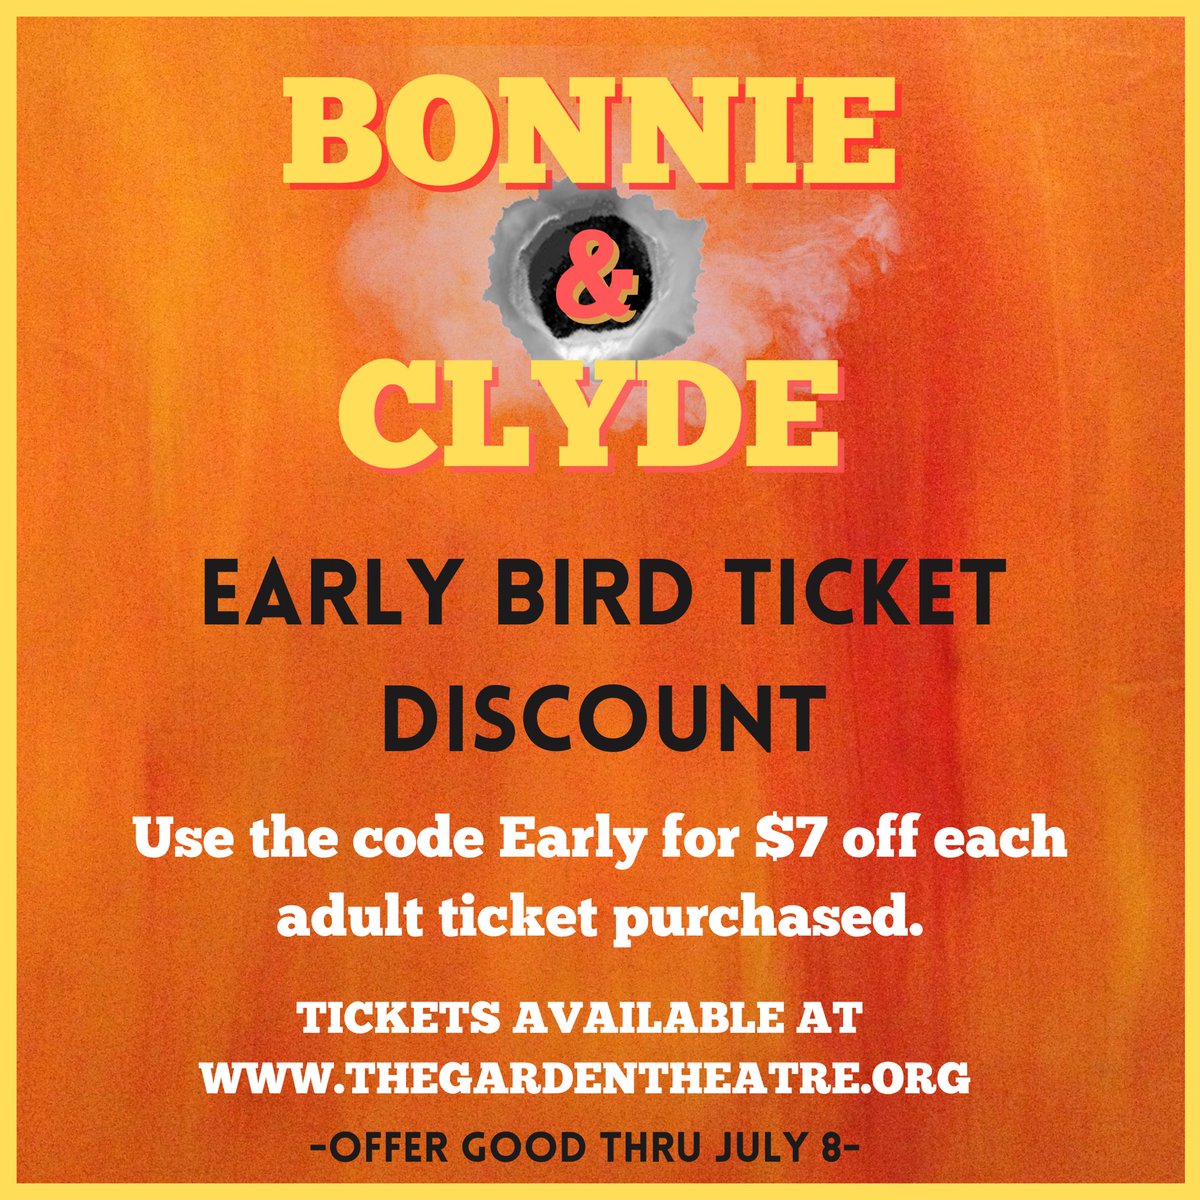 Get your Bonnie & Clyde tickets before the rush, and get $7 off each adult ticket purchased when you use the code Early! Act fast to secure your seats today. Offer good thru July 8 only. Tickets at thegardentheatre.org/bonnie-clyde. #TheGardenTheatre #TGTHou #BonnieAndClyde #HouArts